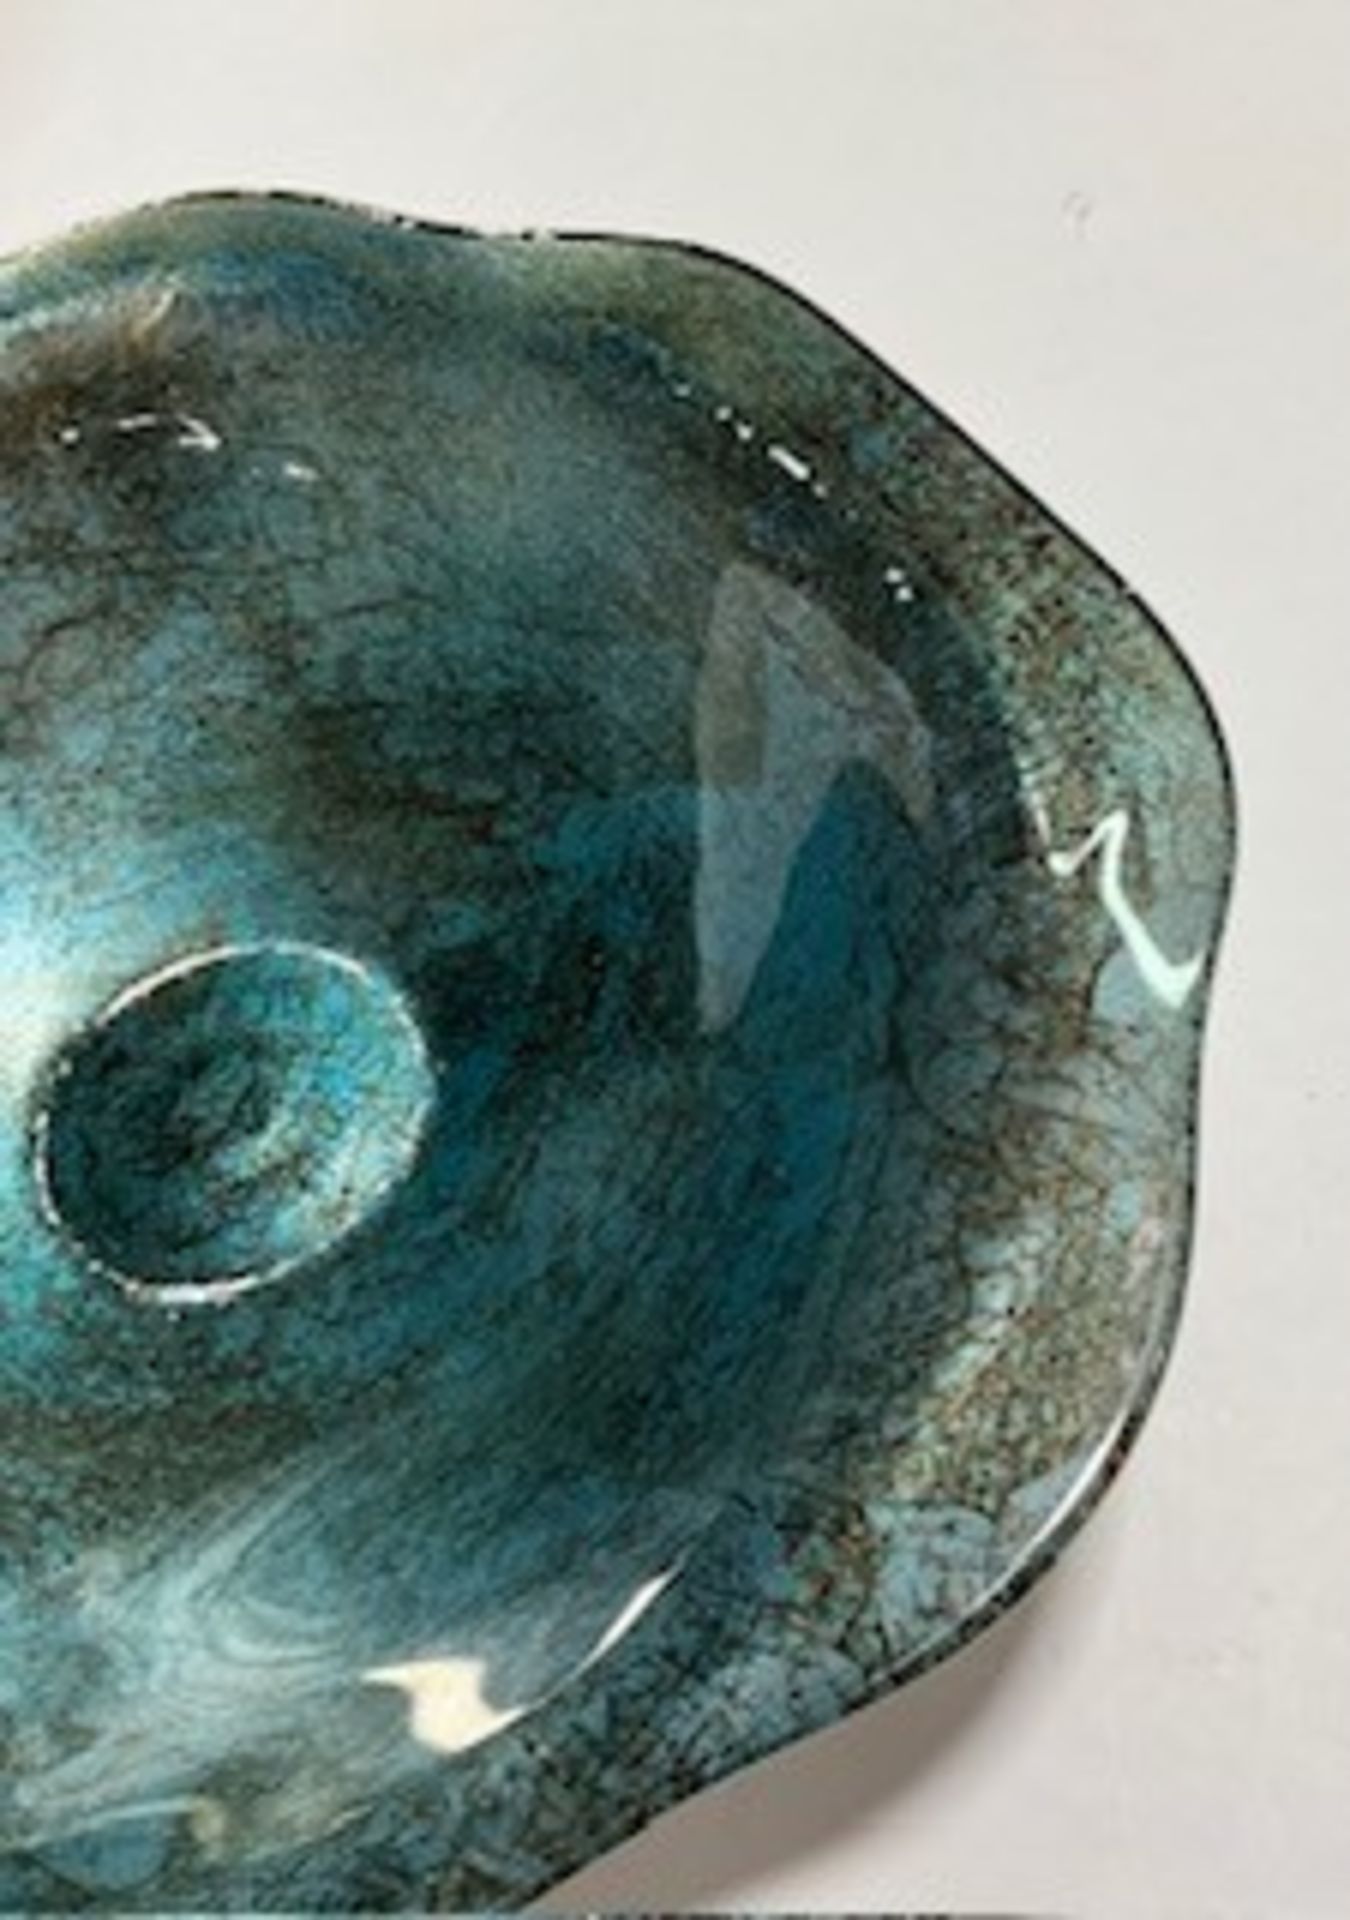 Attributed Dale Chihuly Art Glass Bowl - Image 6 of 14